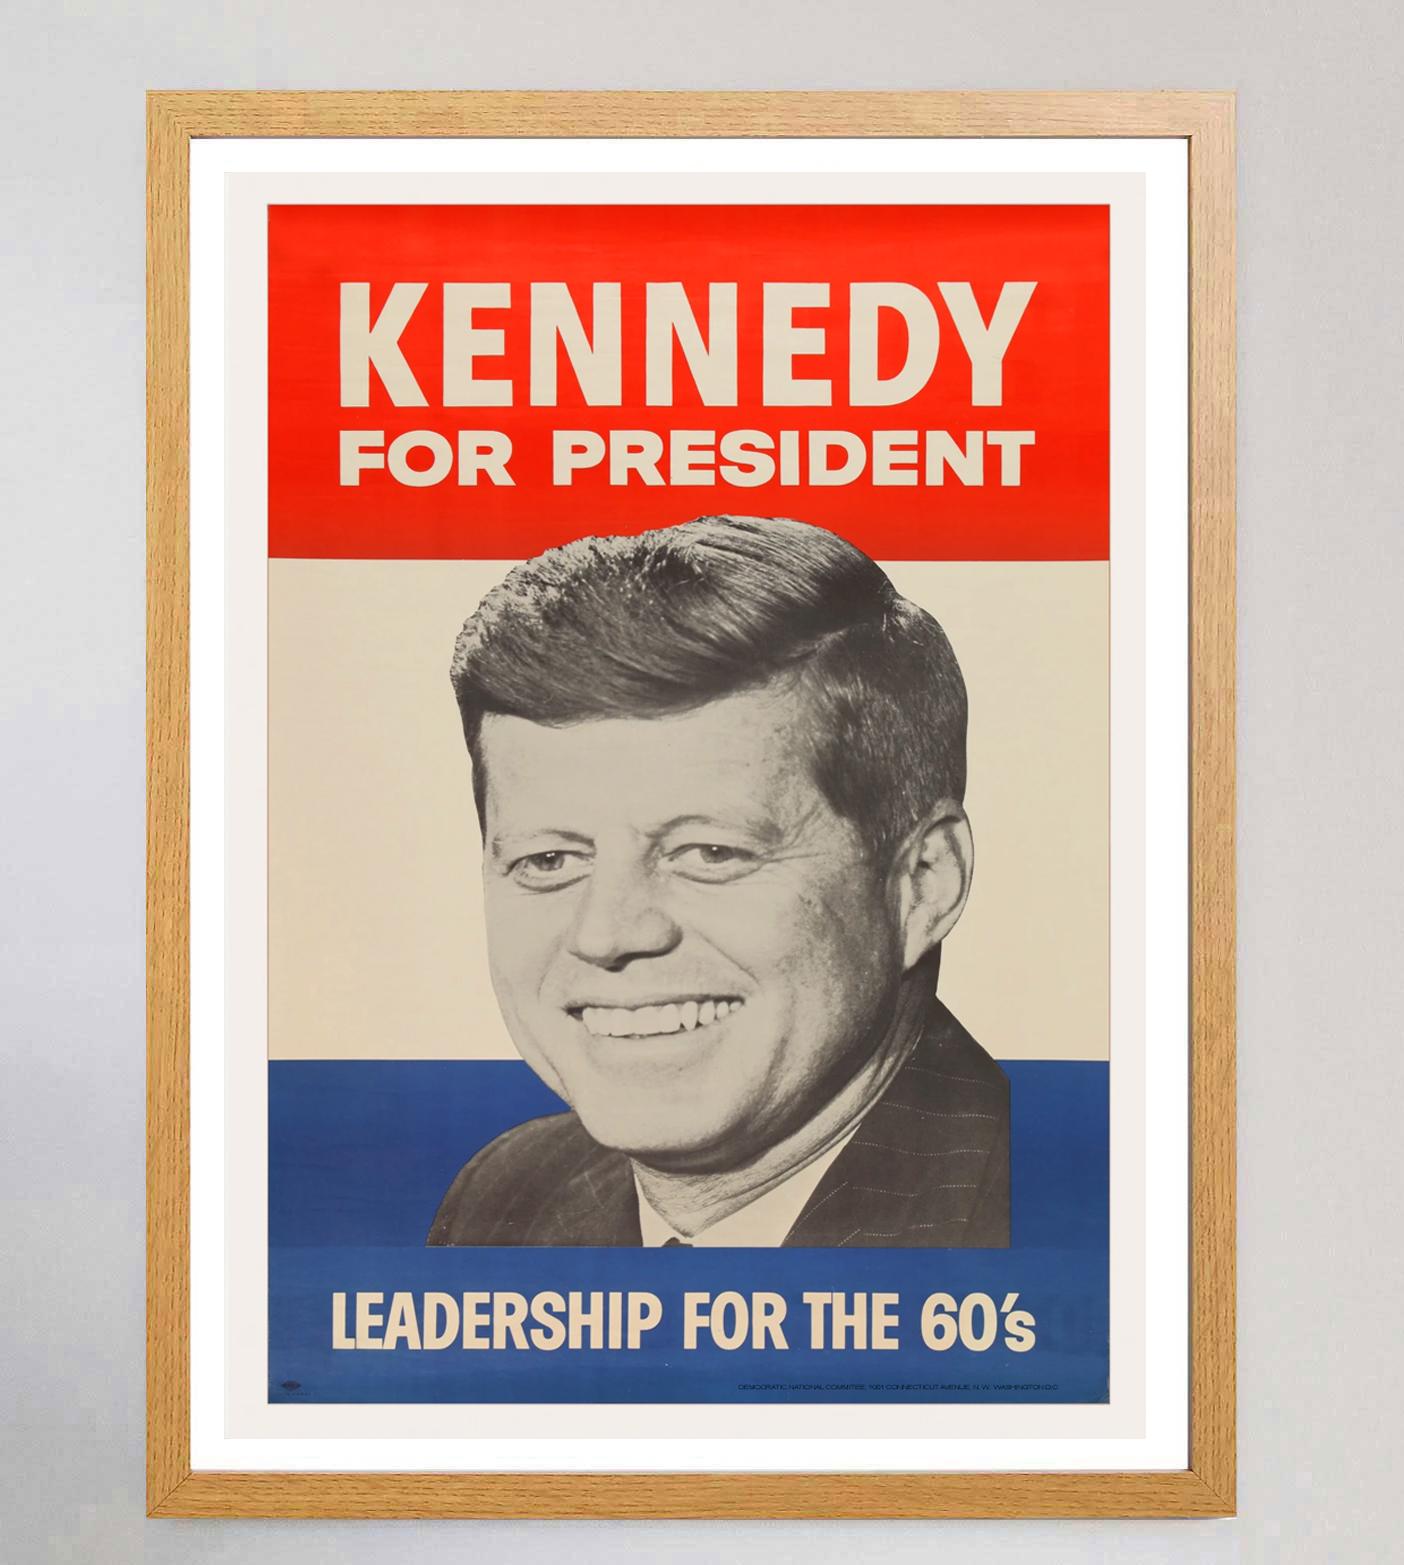 American 1960 Kennedy for President - Leadership for the 60's Original Vintage Poster For Sale